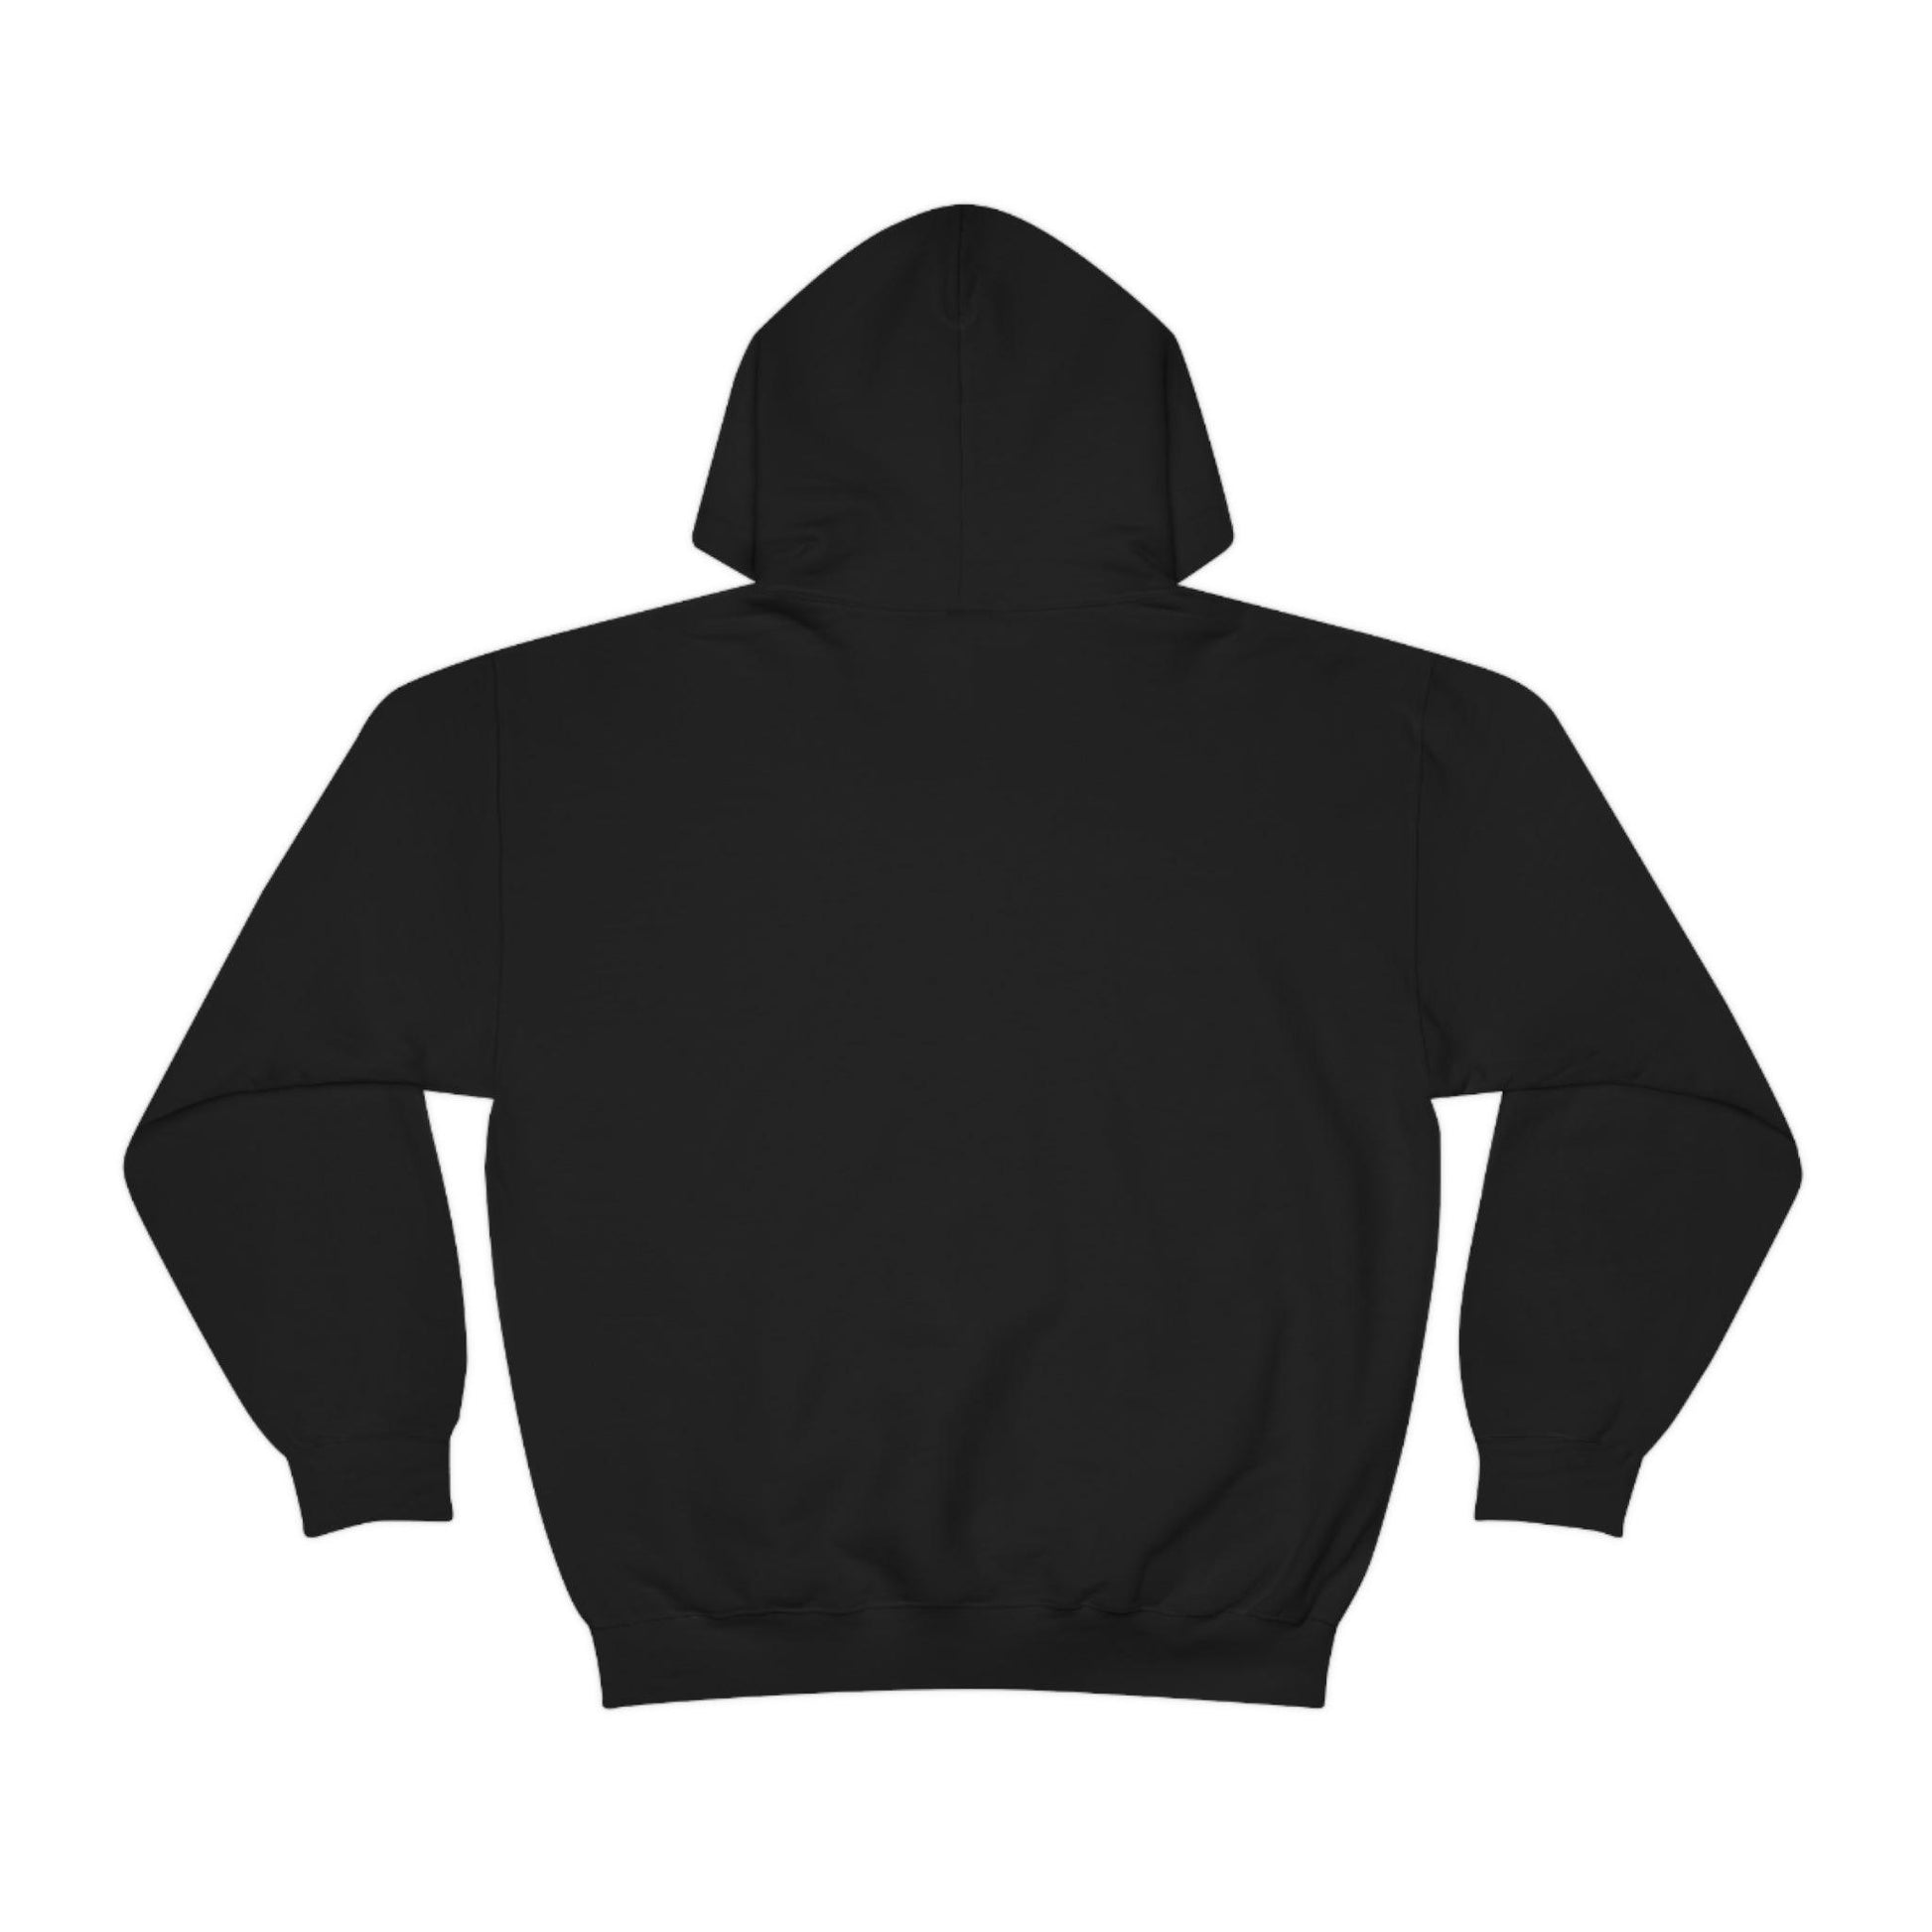 Valentine's day Hooded Sweatshirt (this is all i want for valentine) - Giftsmojo